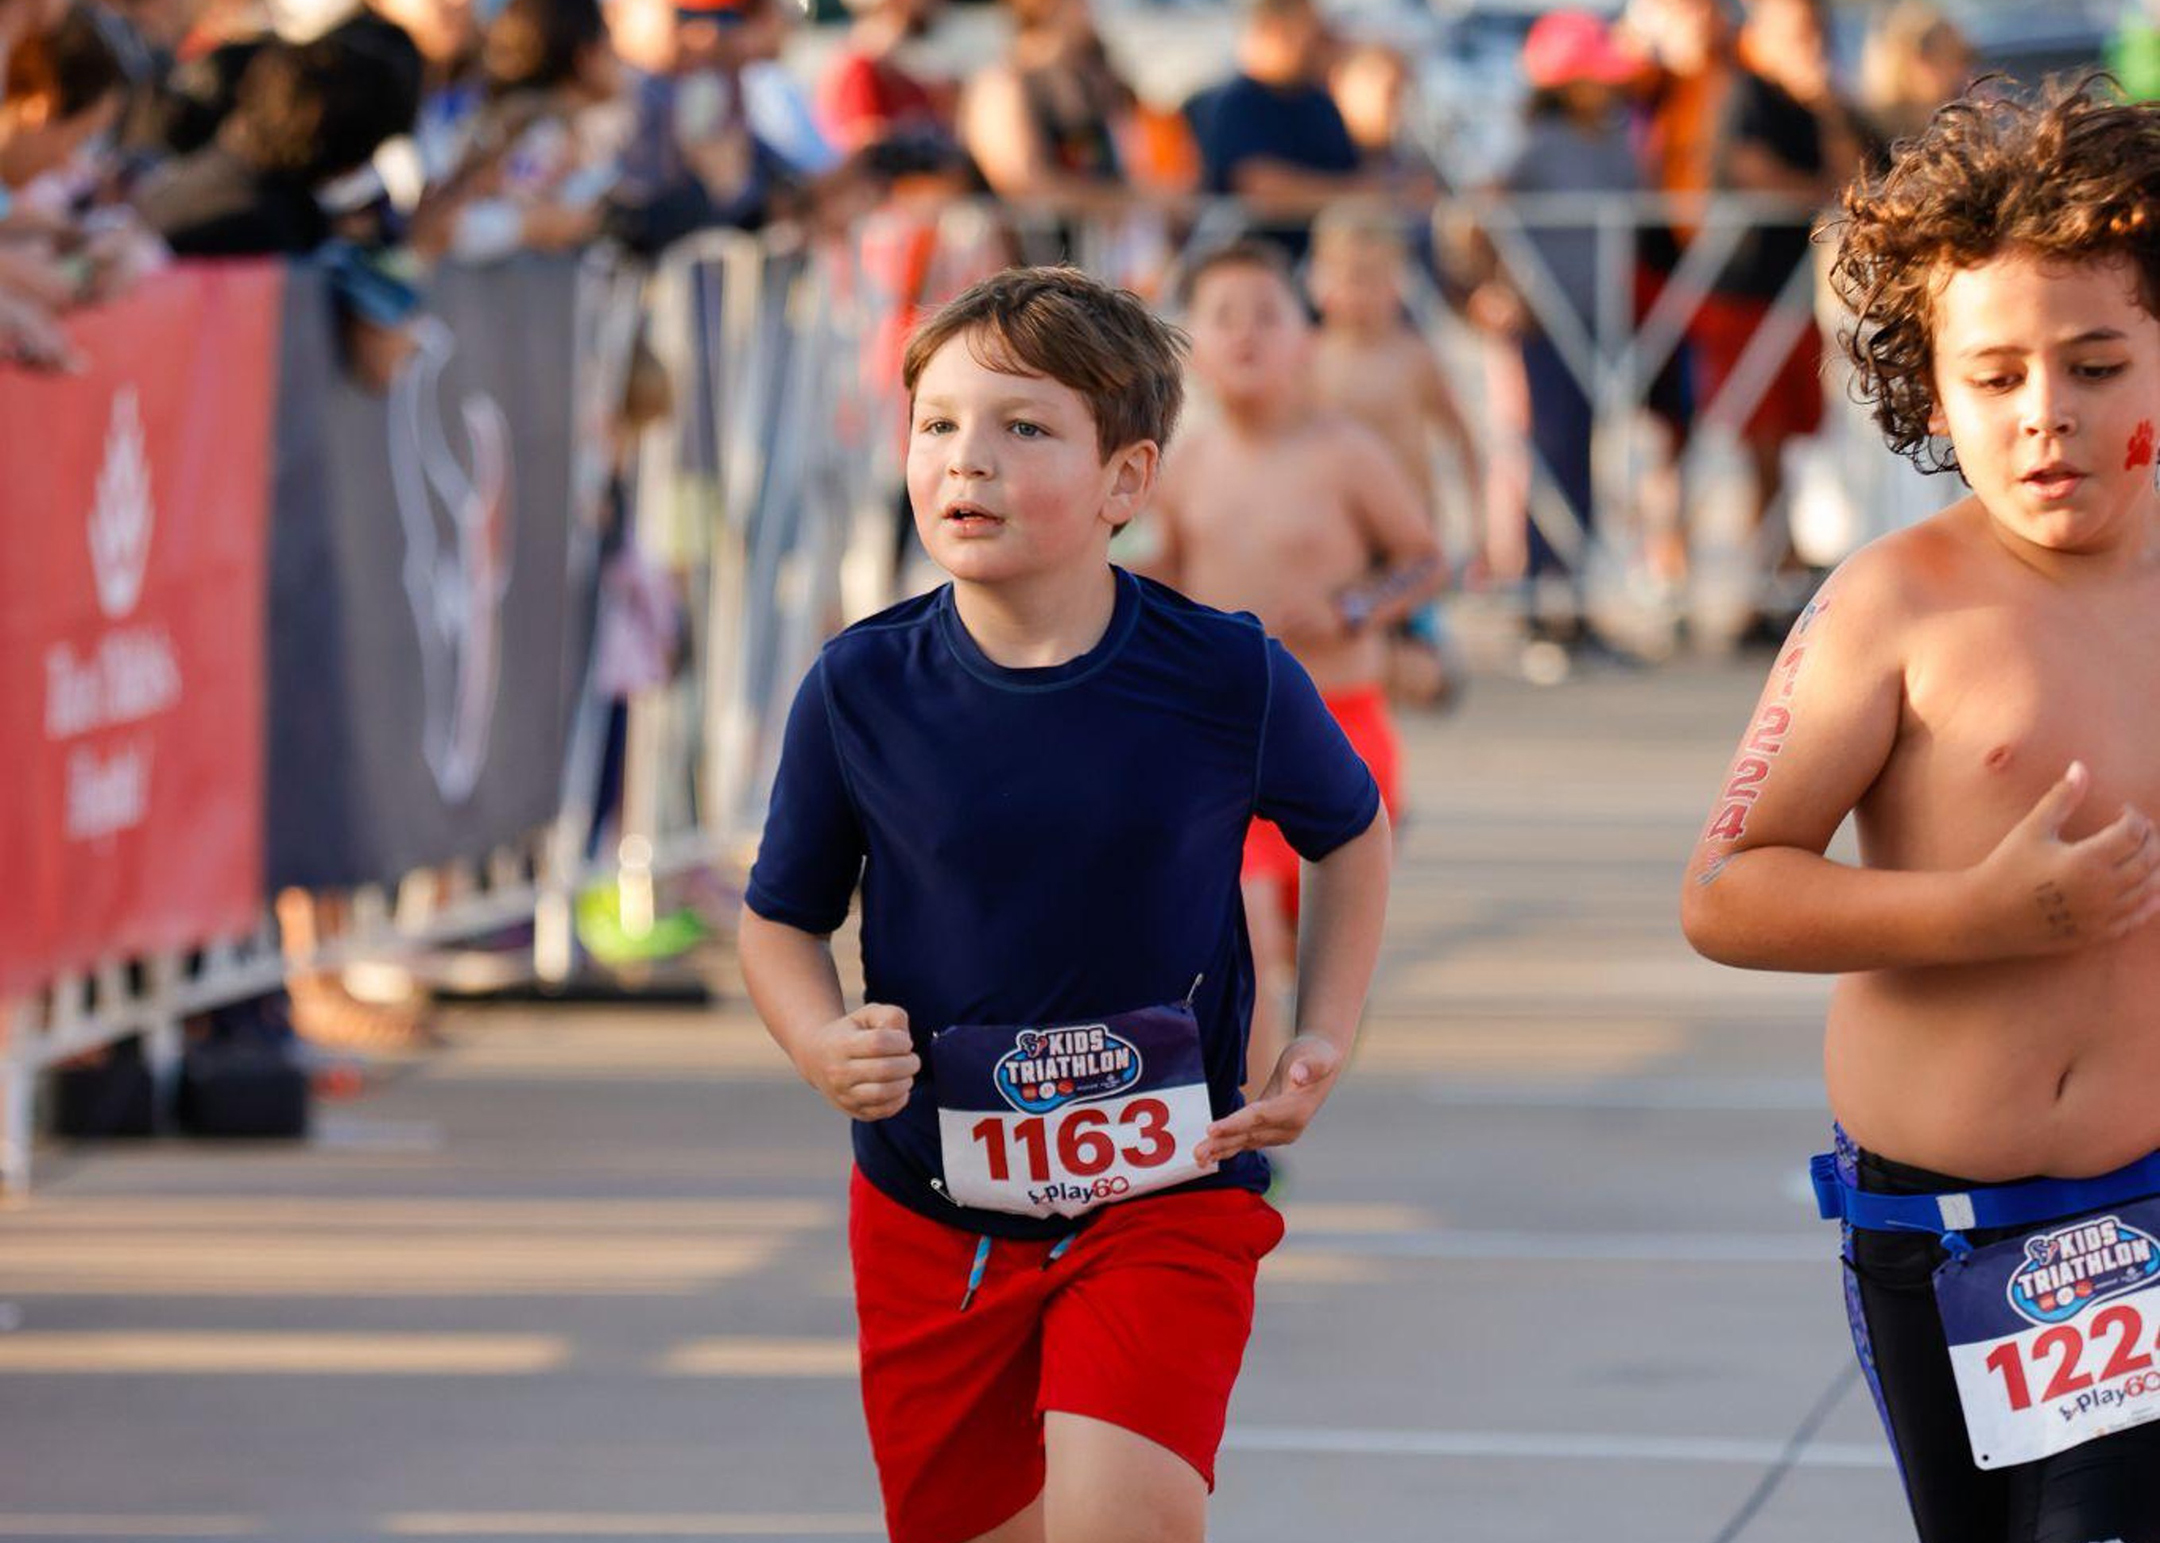 Photo of two boys running a race, one with his shirt on, on the left, and one without a shirt, on the right